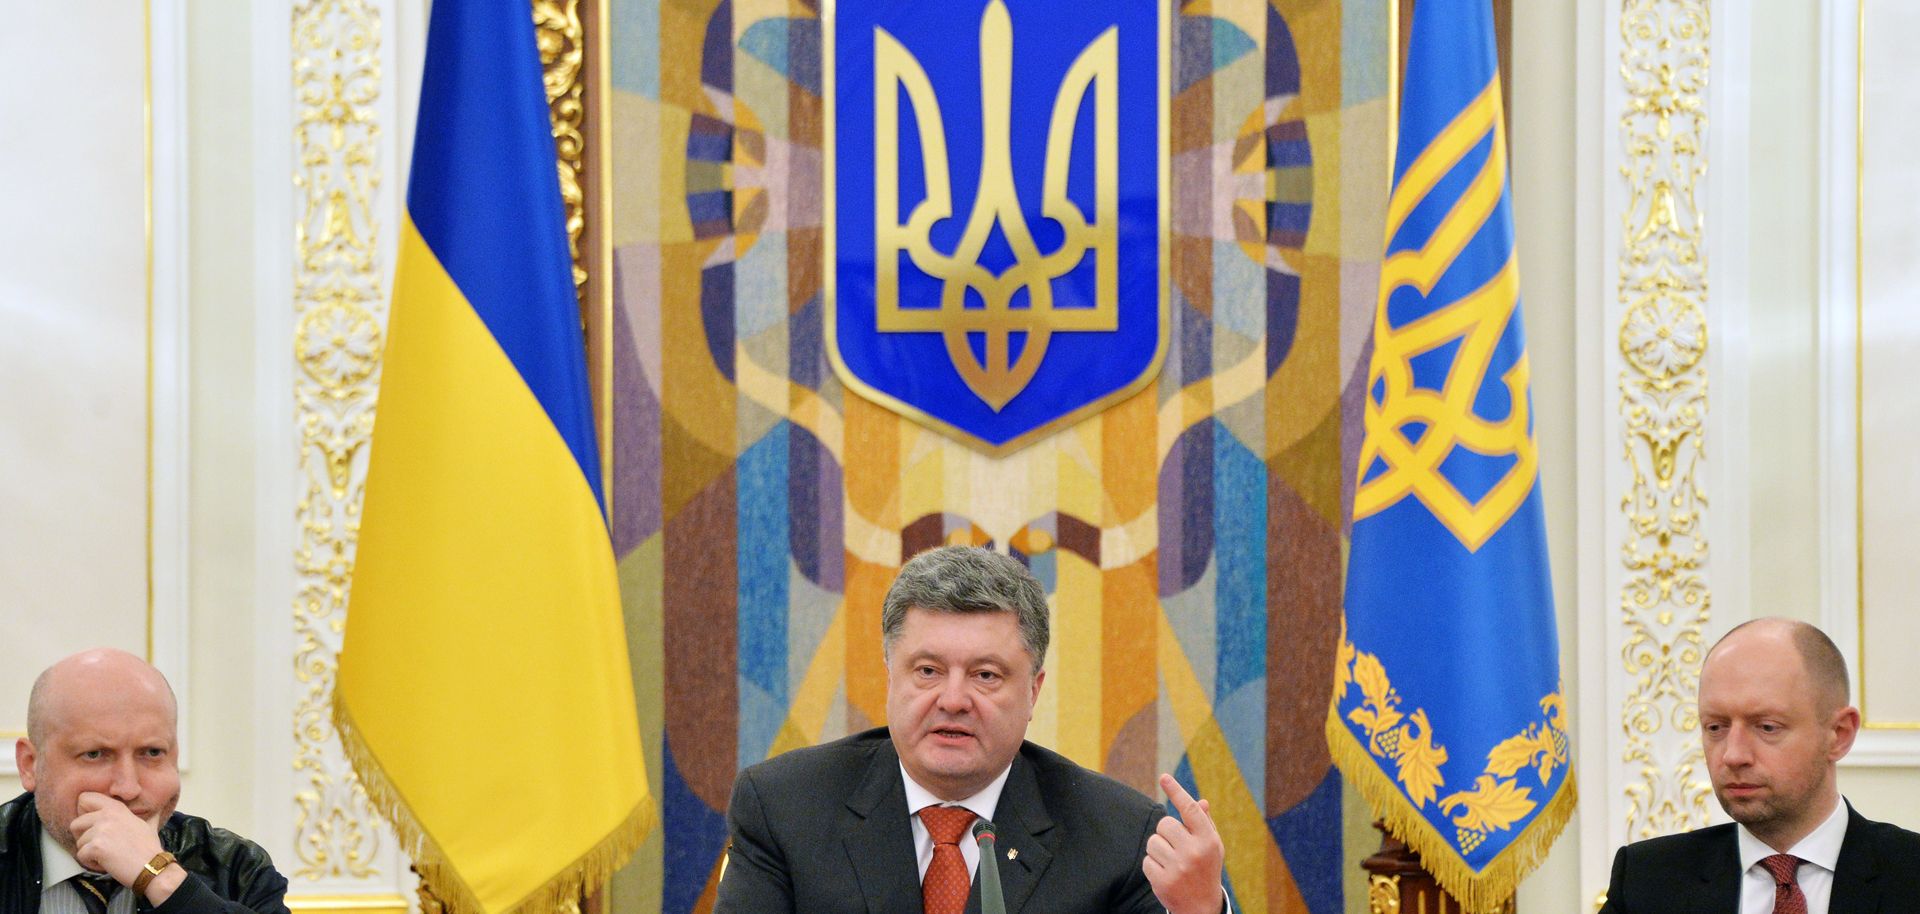 Ukraine's Crisis Changes Fate for Some Oligarchs